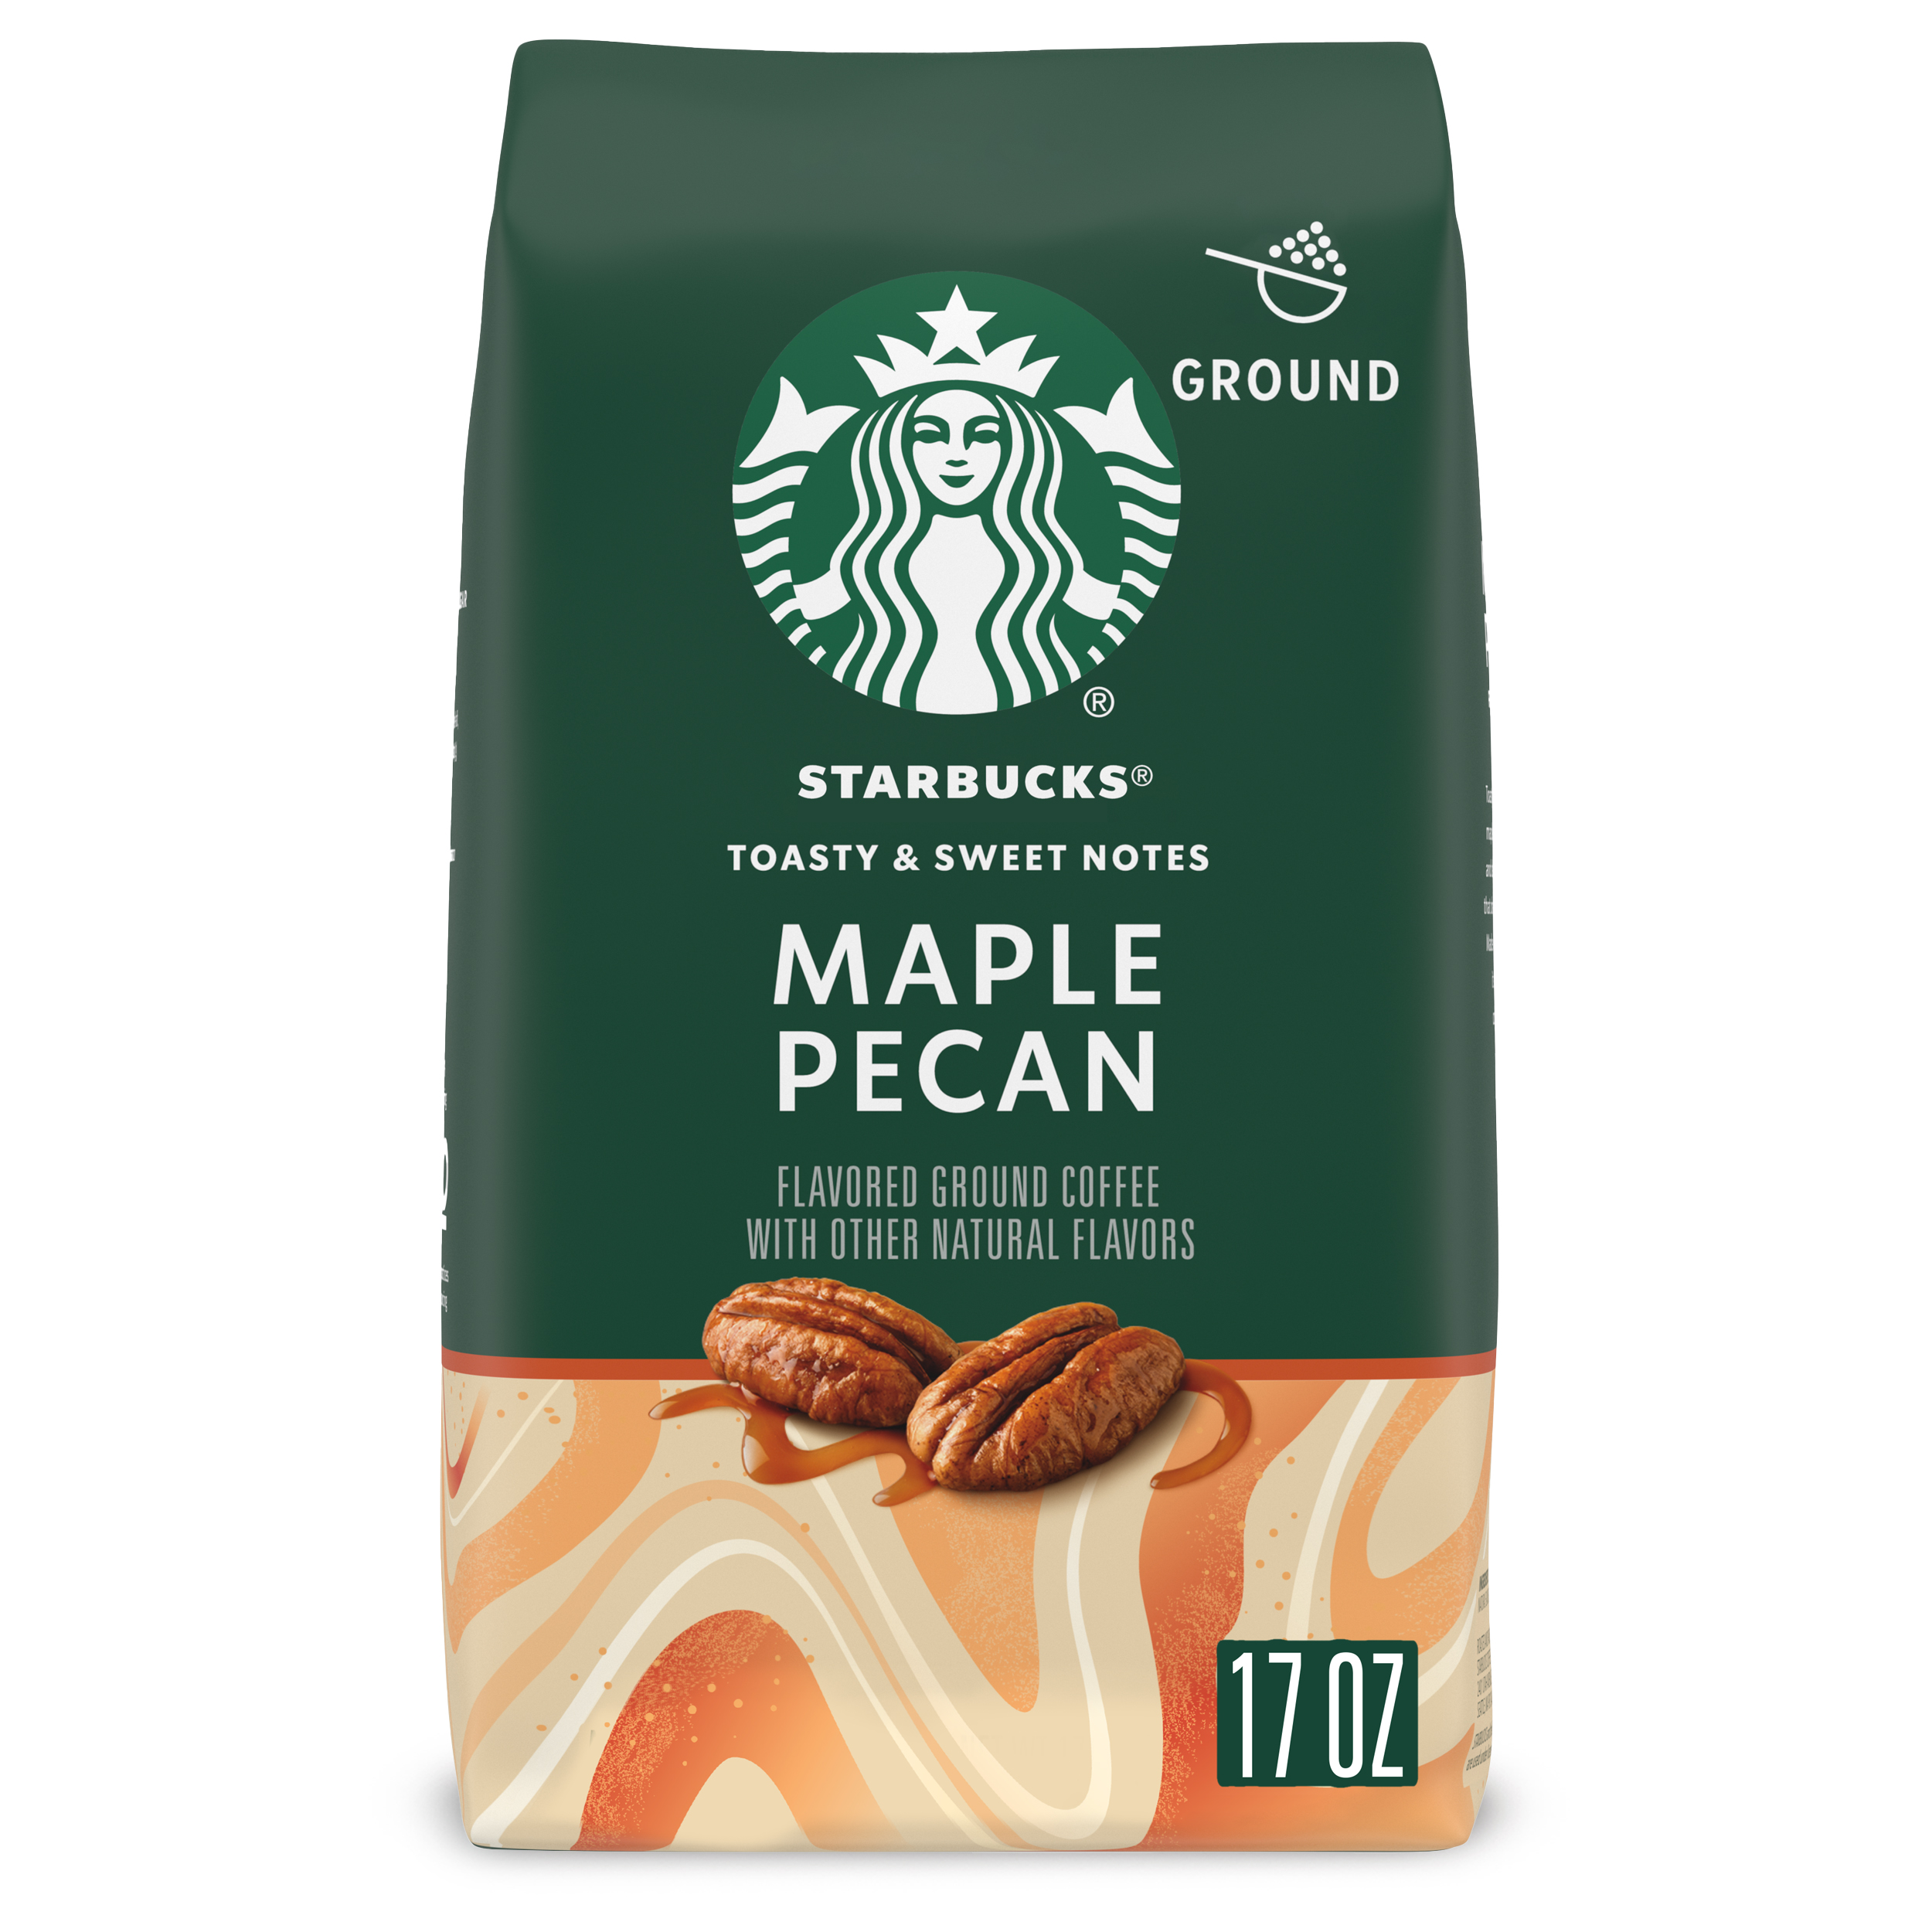 Starbucks Arabica Beans Maple Pecan, Naturally Flavored, Ground Coffee, 17 oz - image 1 of 8